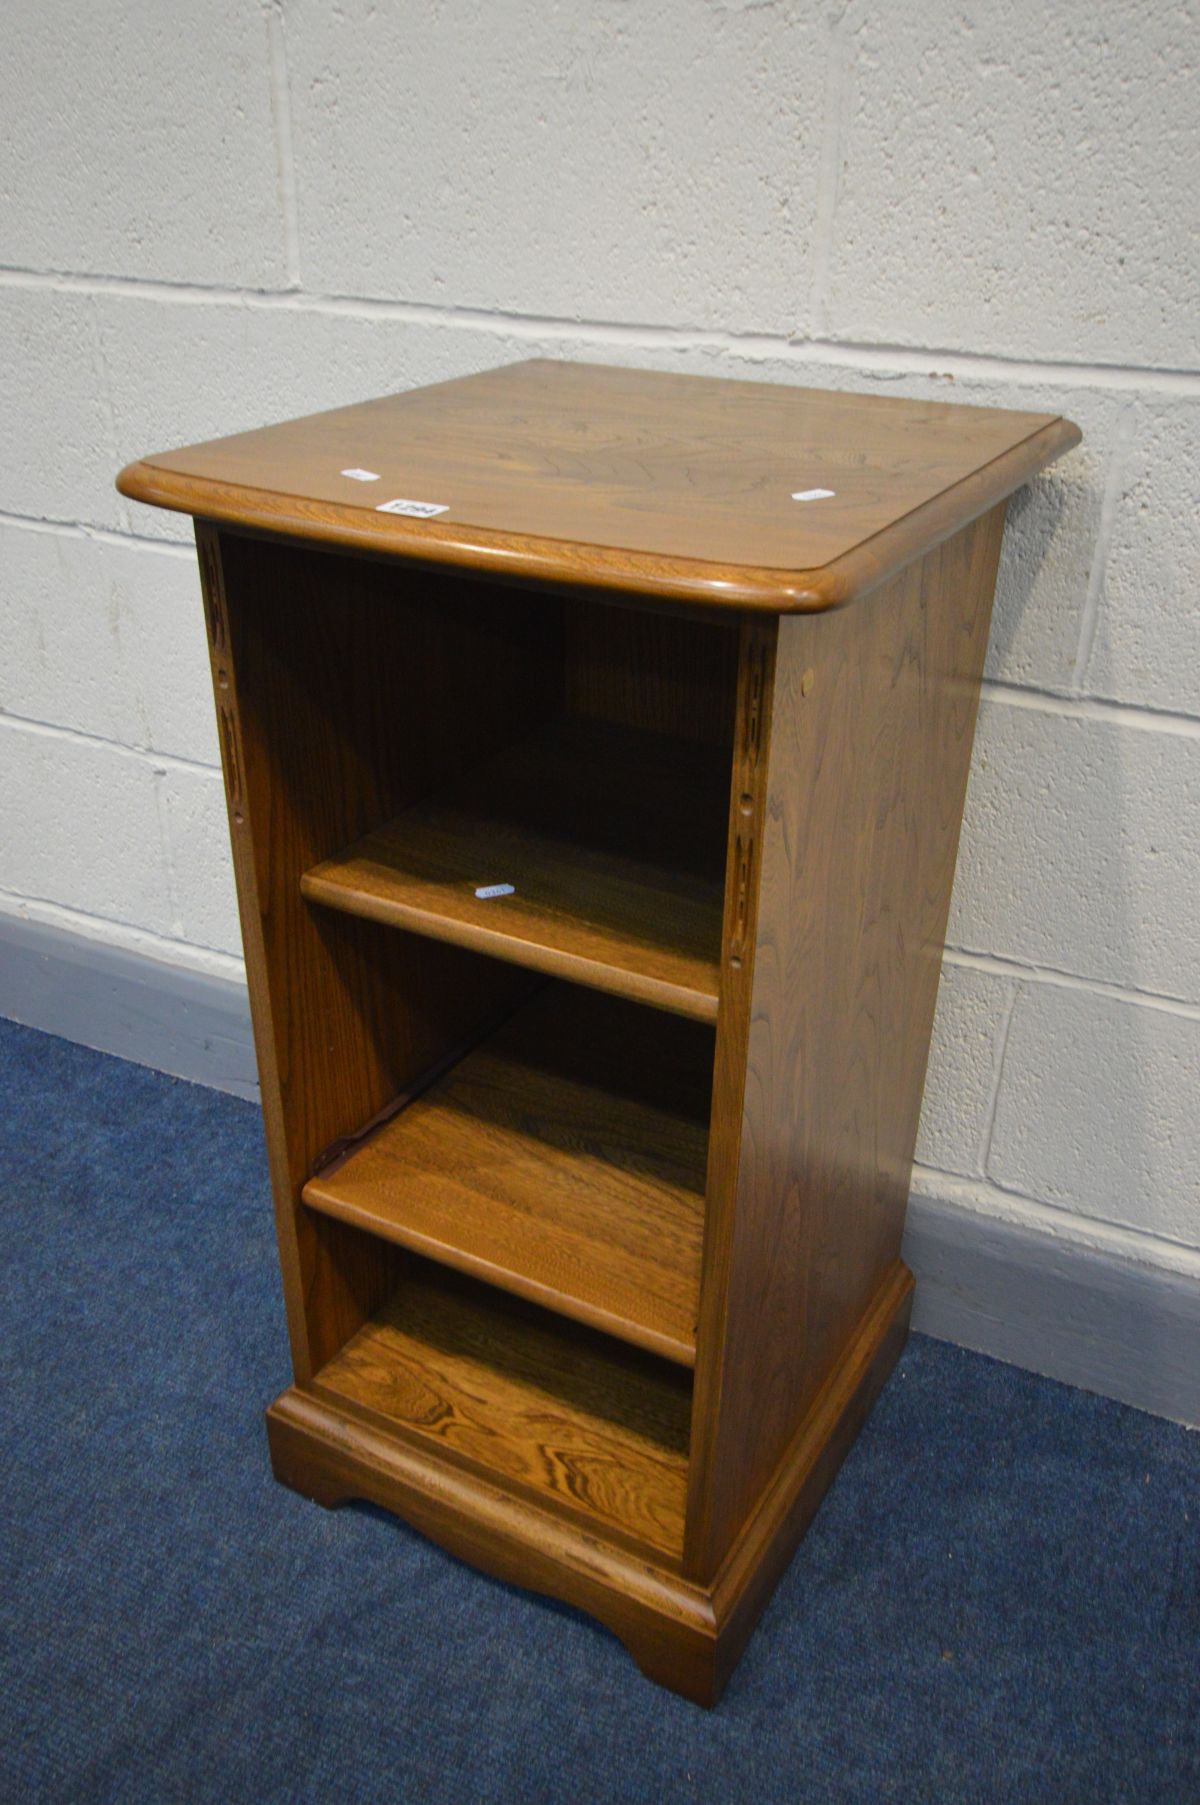 A SMALL ERCOL GOLDEN DAWN OPEN BOOKCASE, with a pull out slide, width 44cm x depth 46cm x height